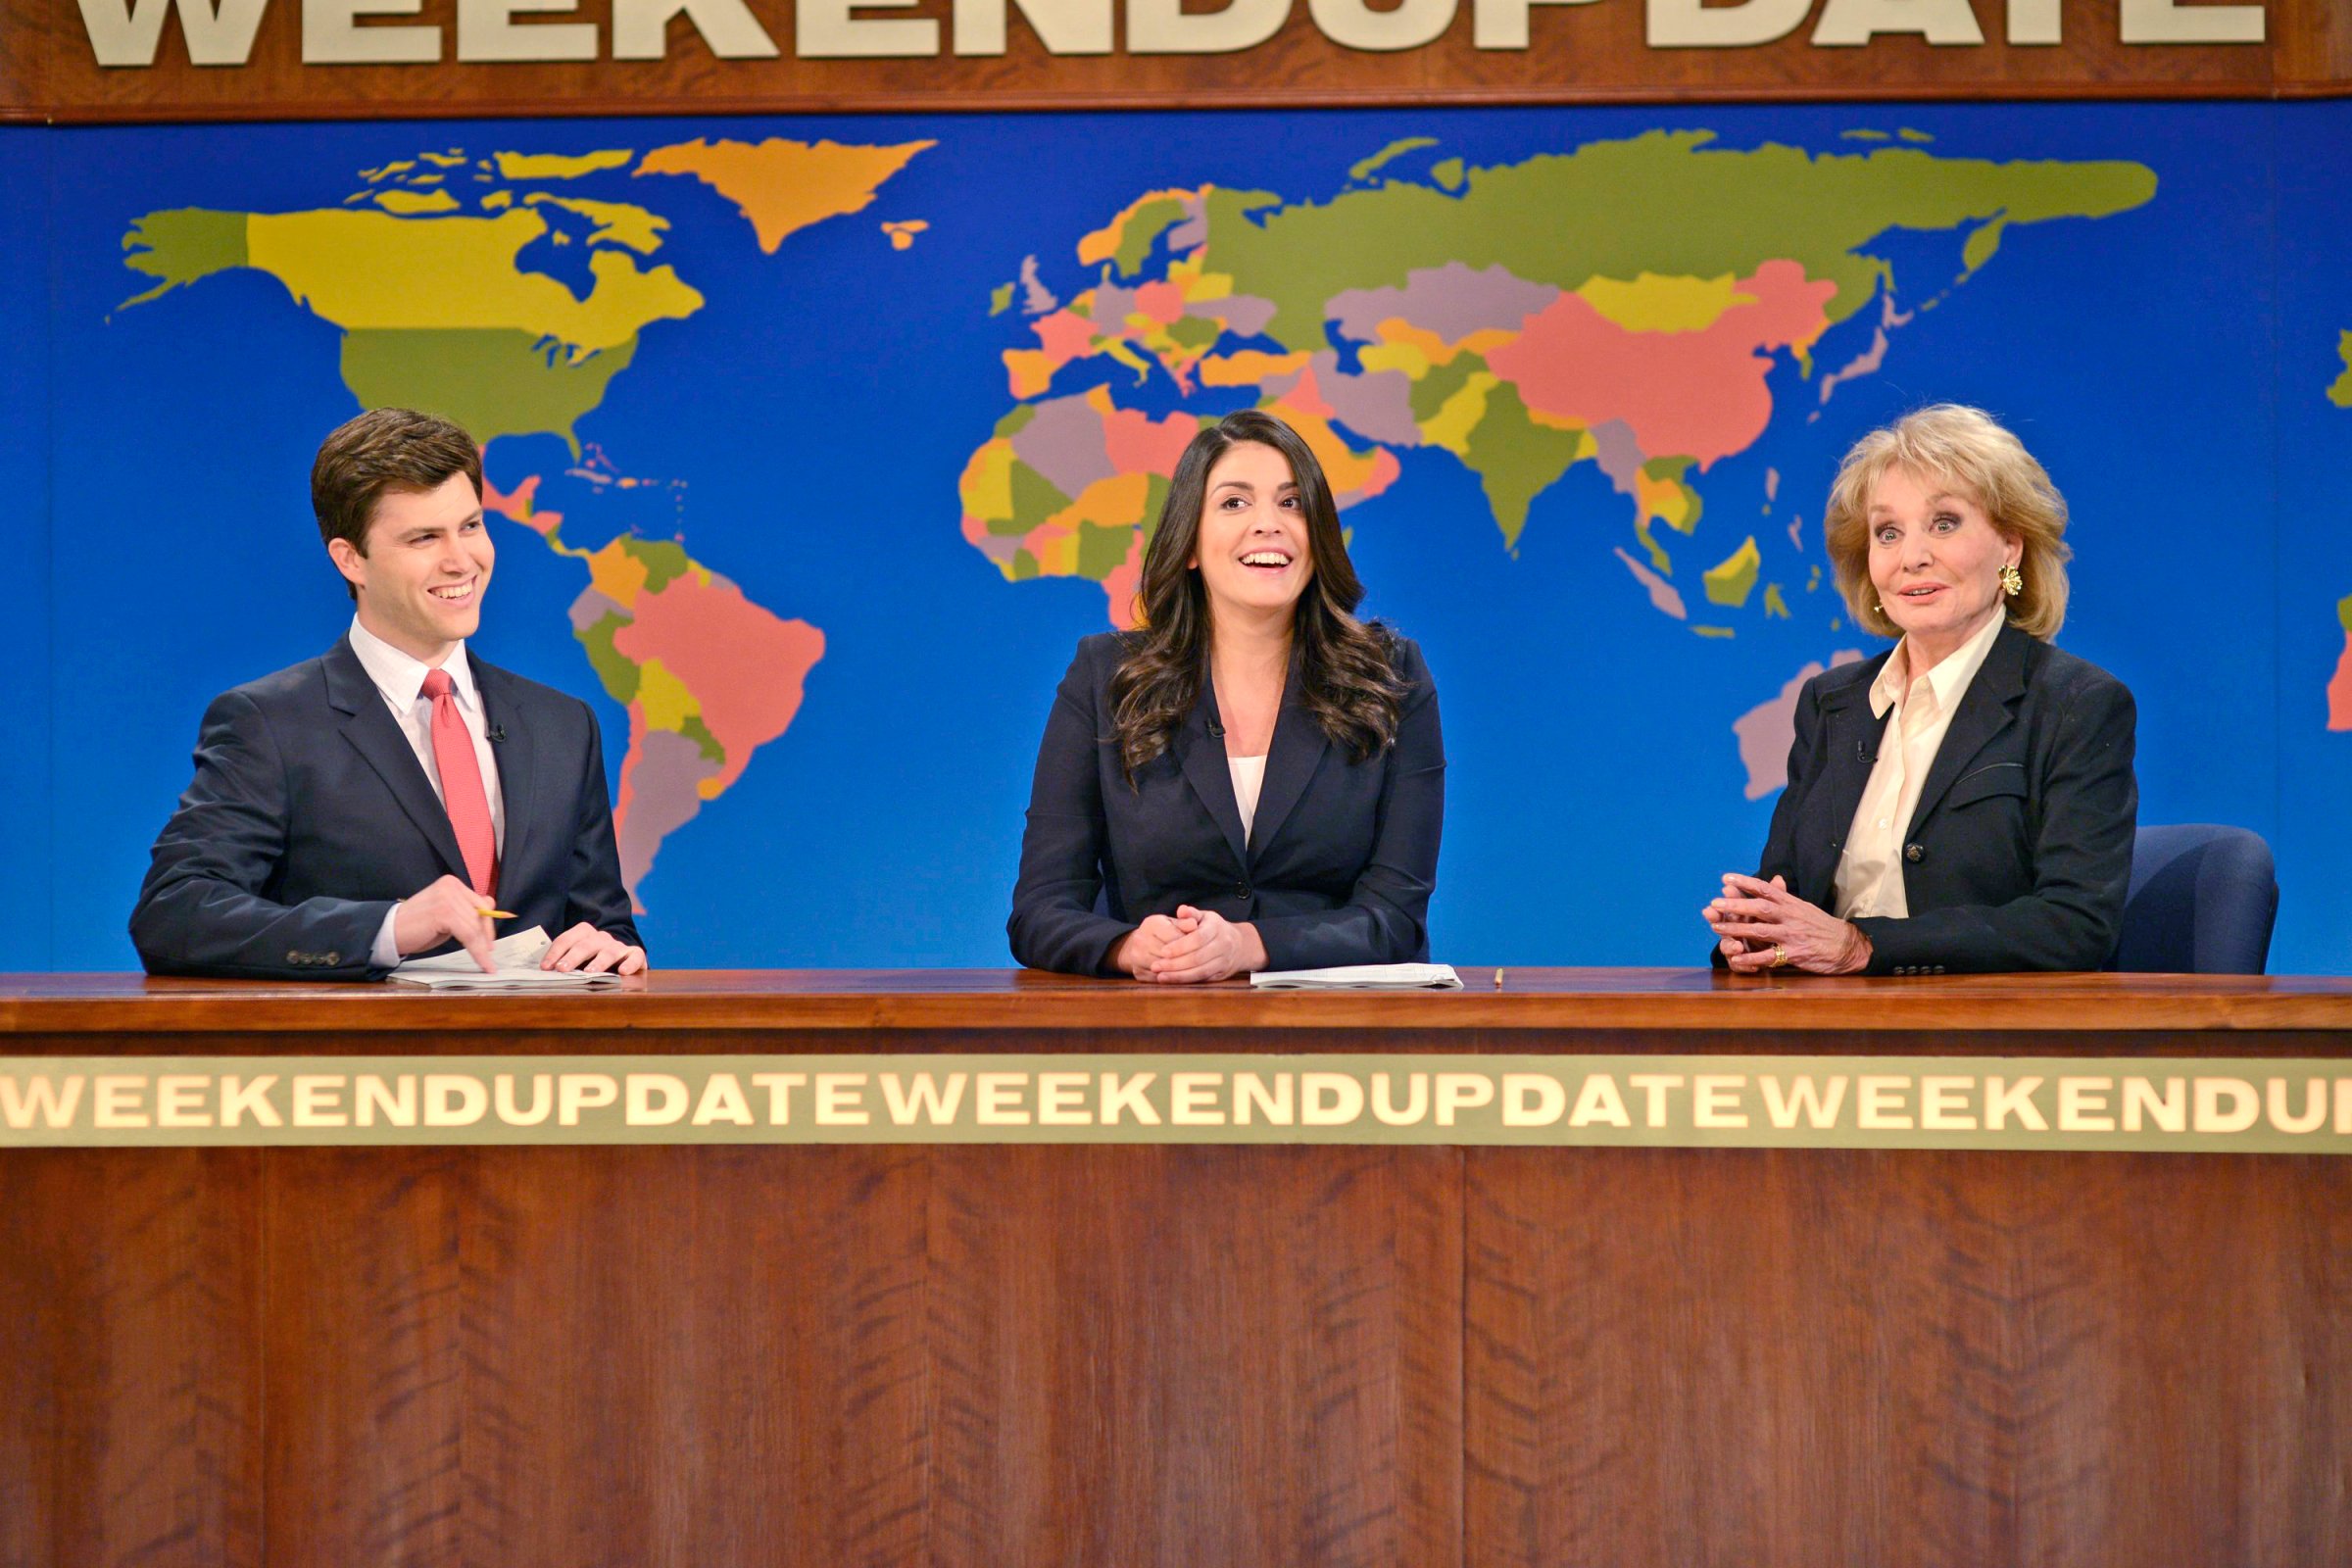 From left: Colin Jost, Cecily Strong and Barbara Walters during Weekend Update on Saturday Night Live on May 10, 2014.